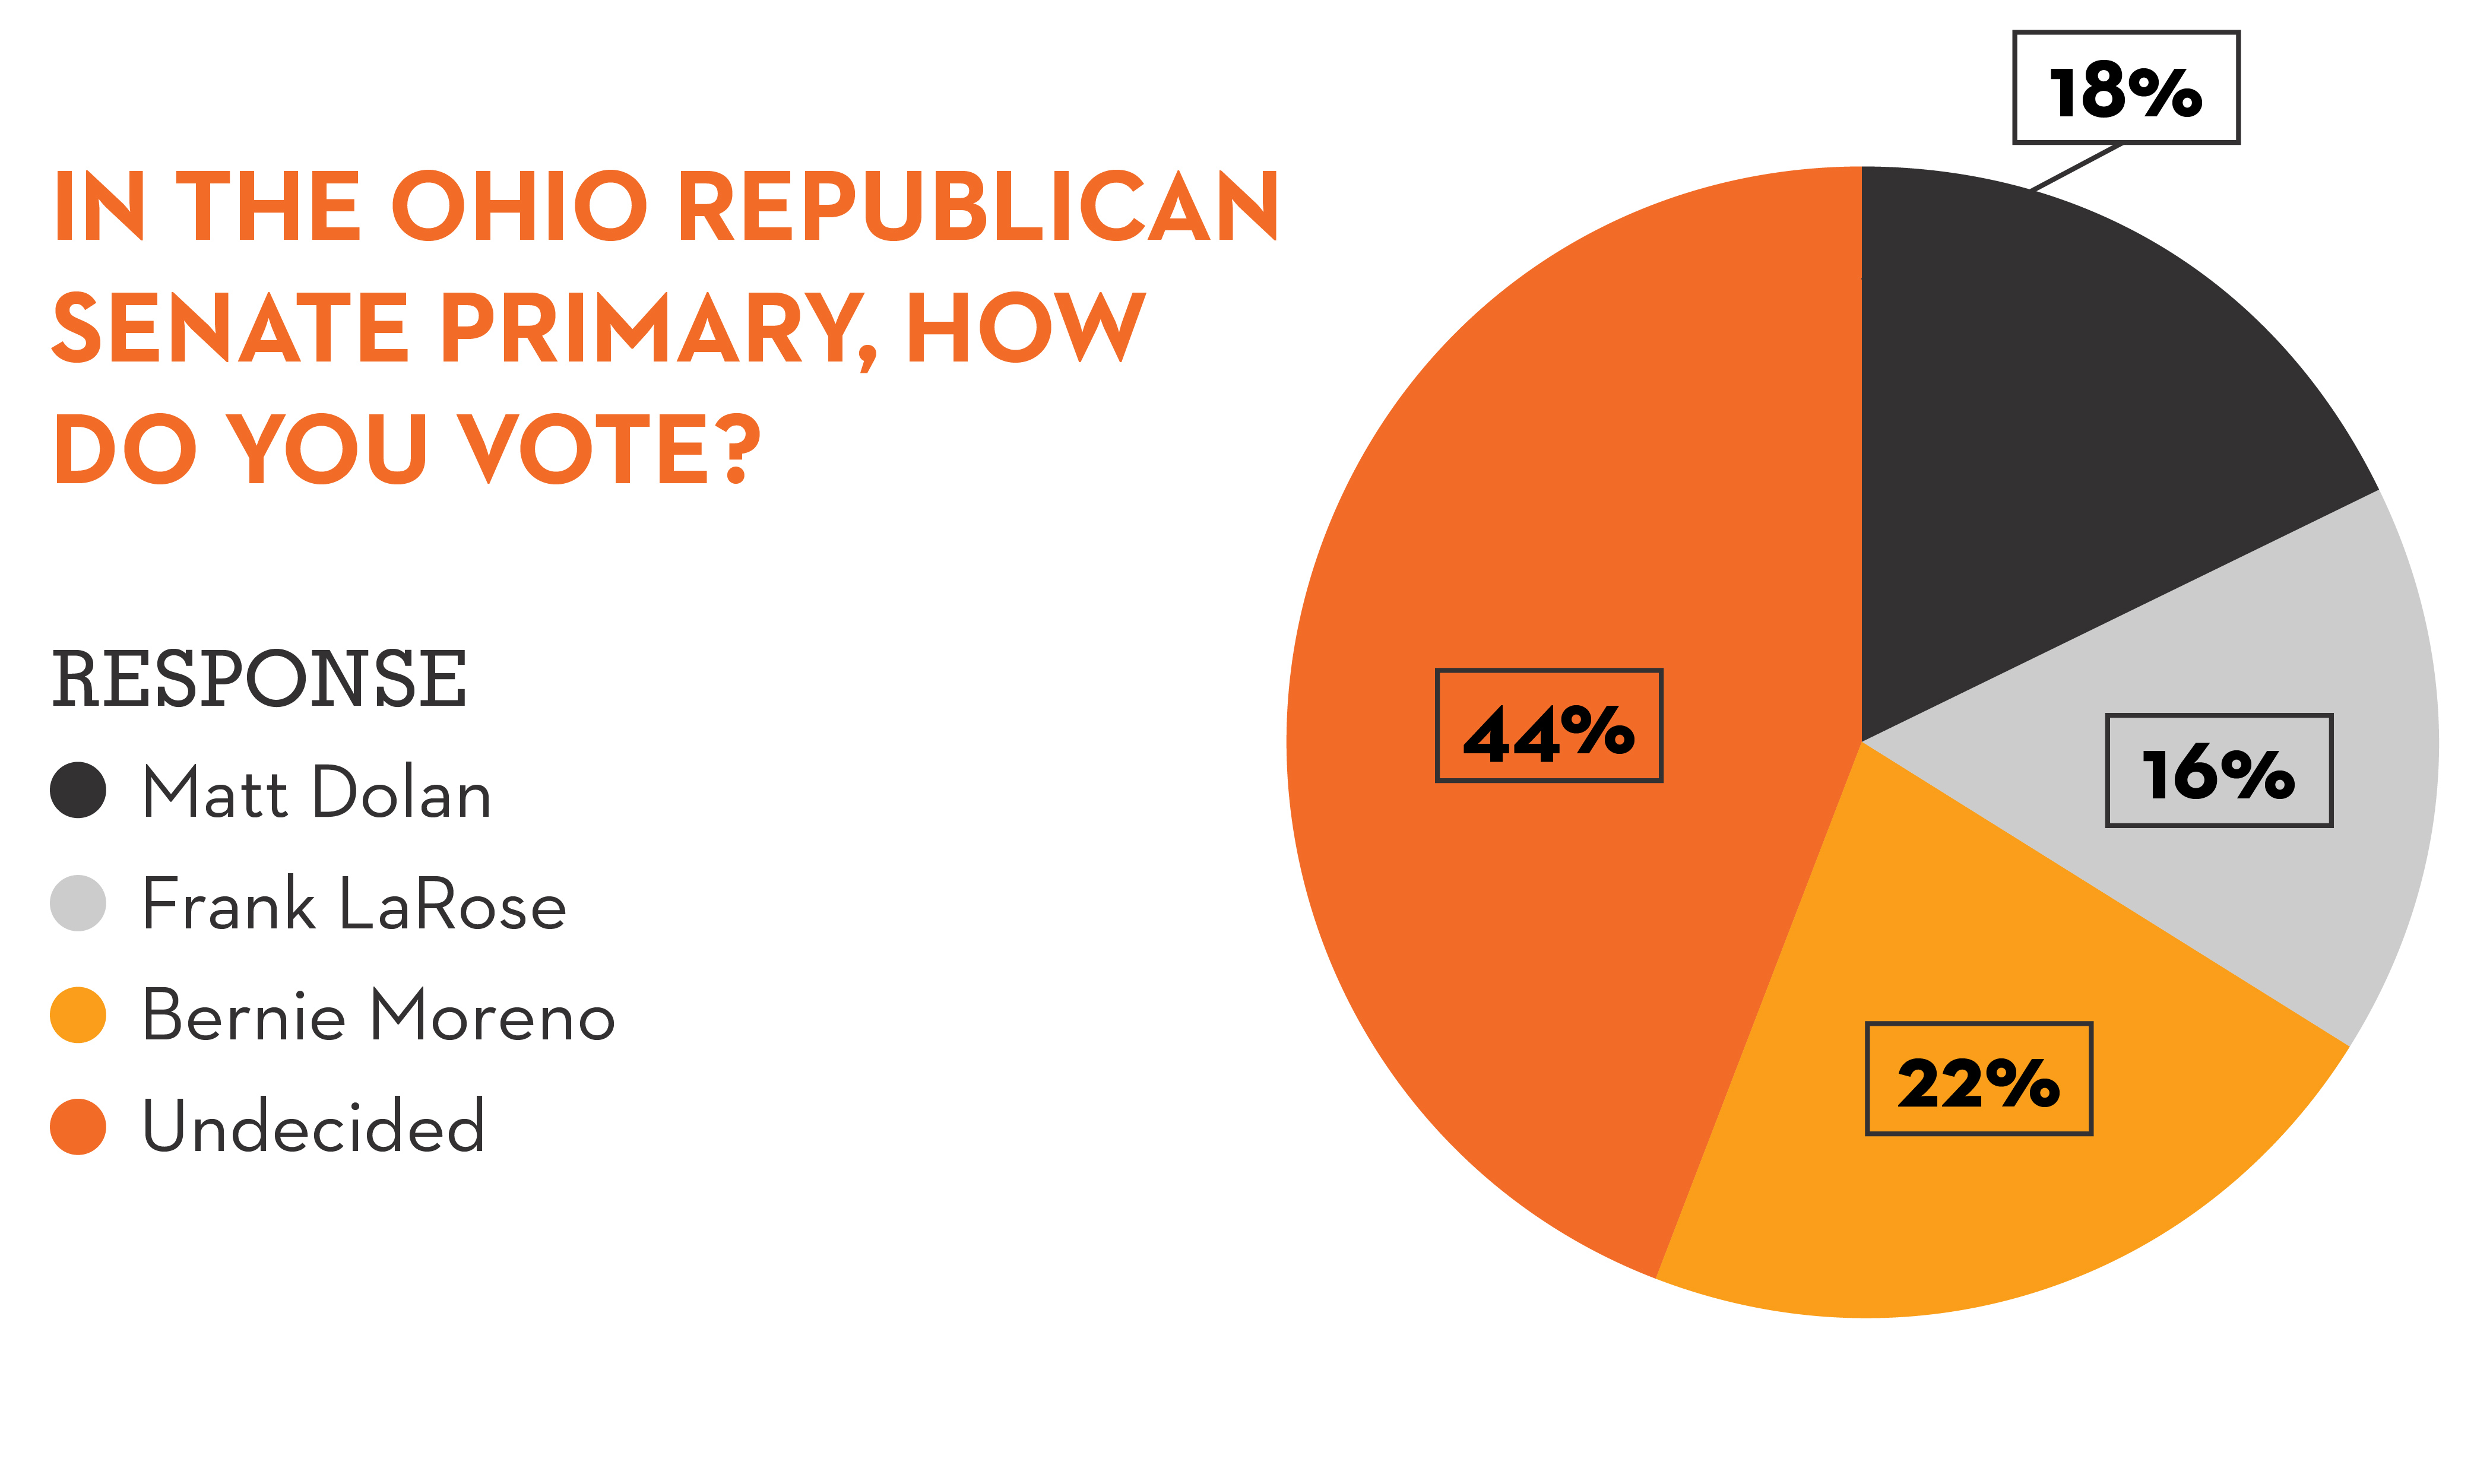 Graphic pie chart answering question "In the Ohio Republican Senate Primary, how do you vote?"